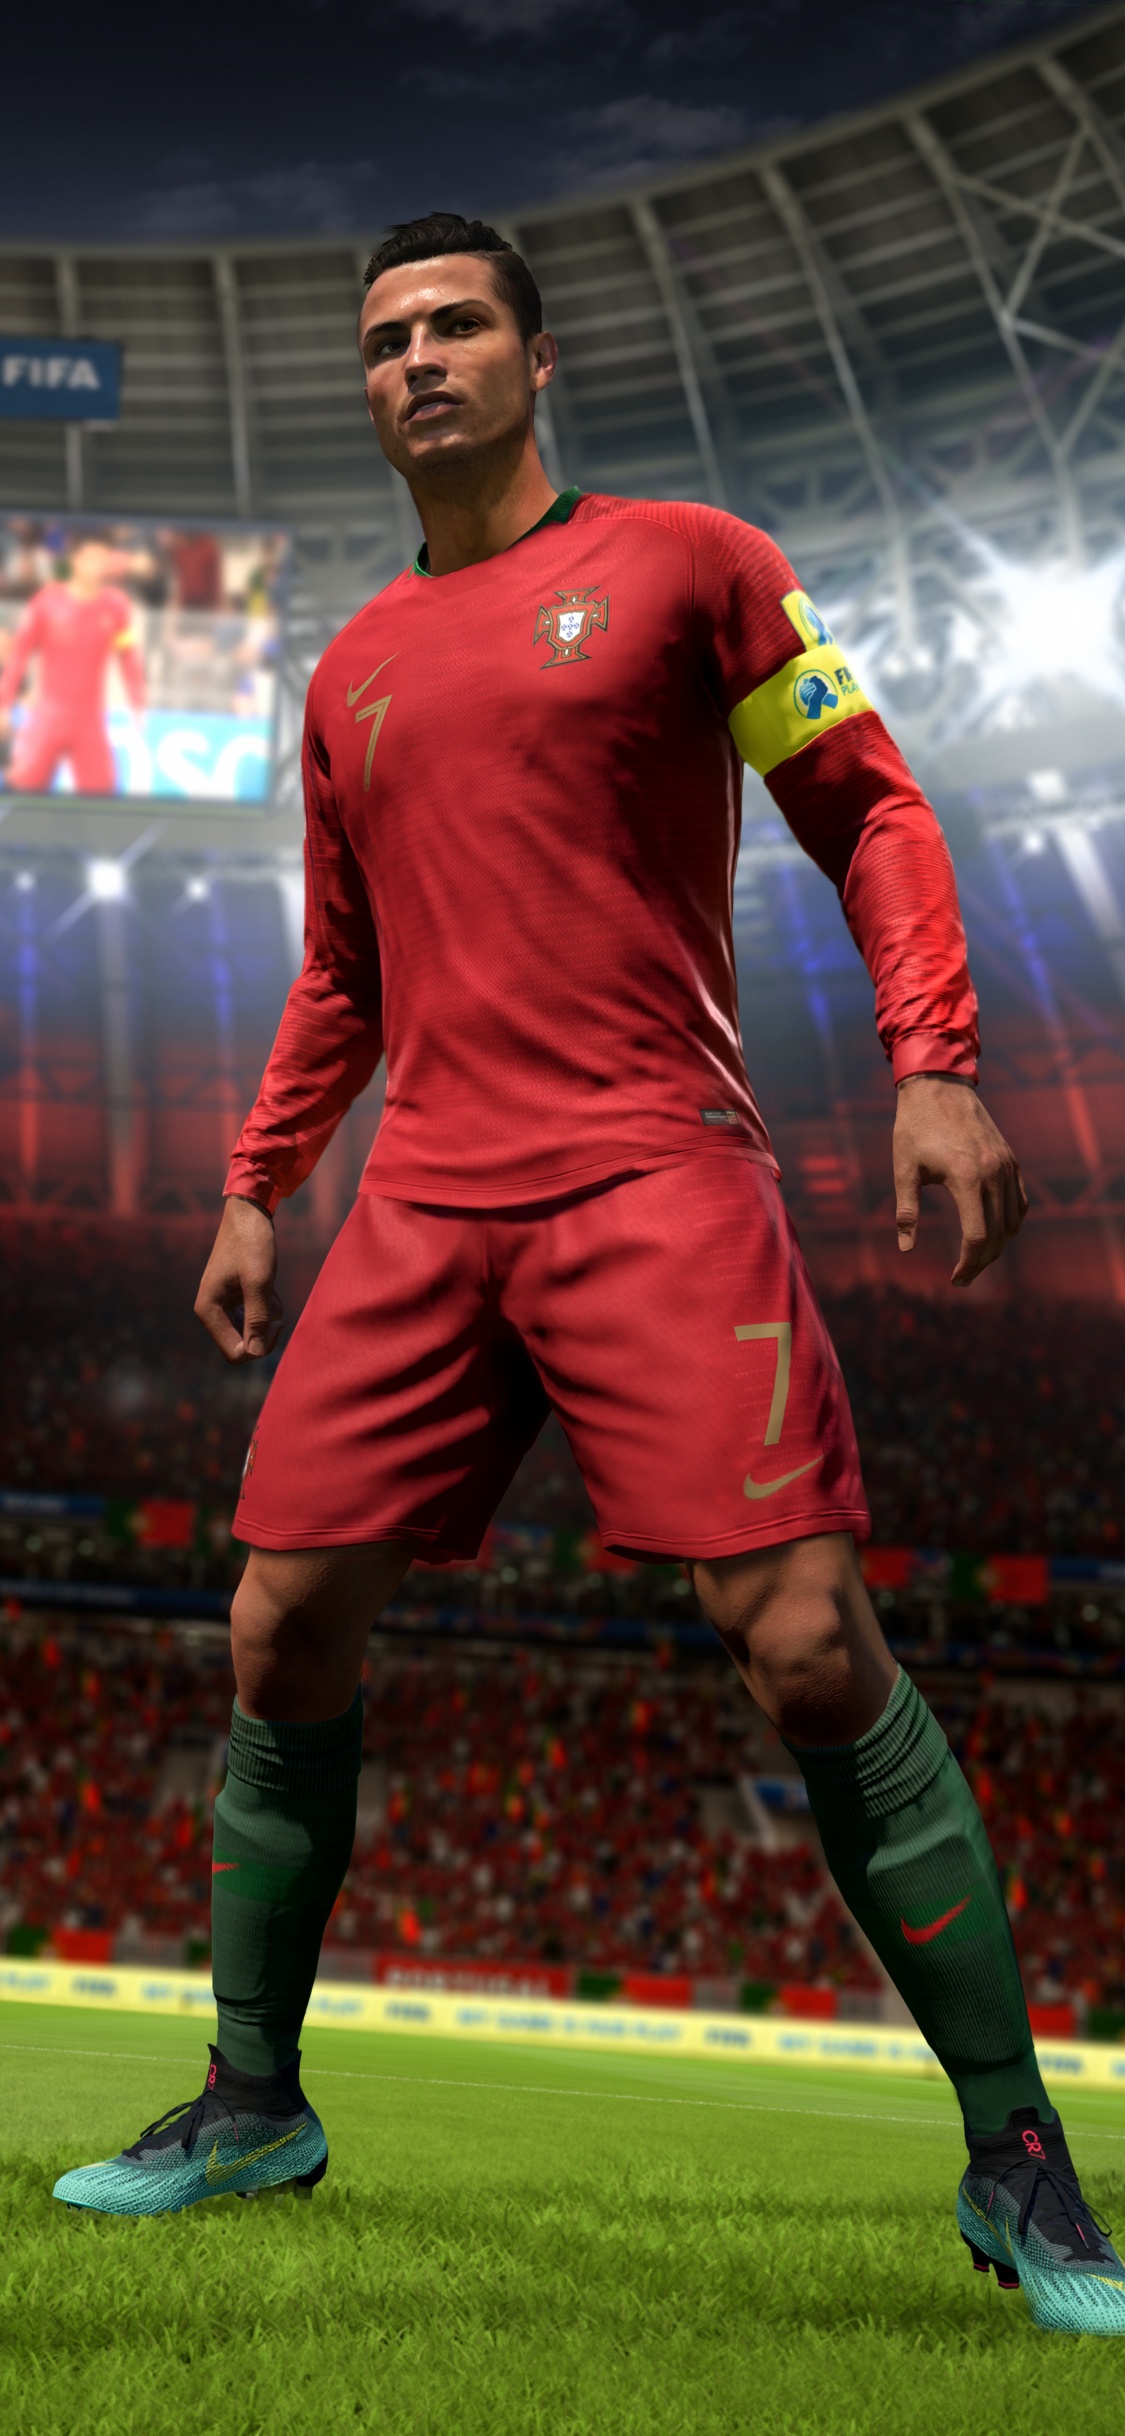 FIFA 18, 2018 World Cup, ea Sports, Electronic Arts, Playstation 4. Wallpaper in 1125x2436 Resolution